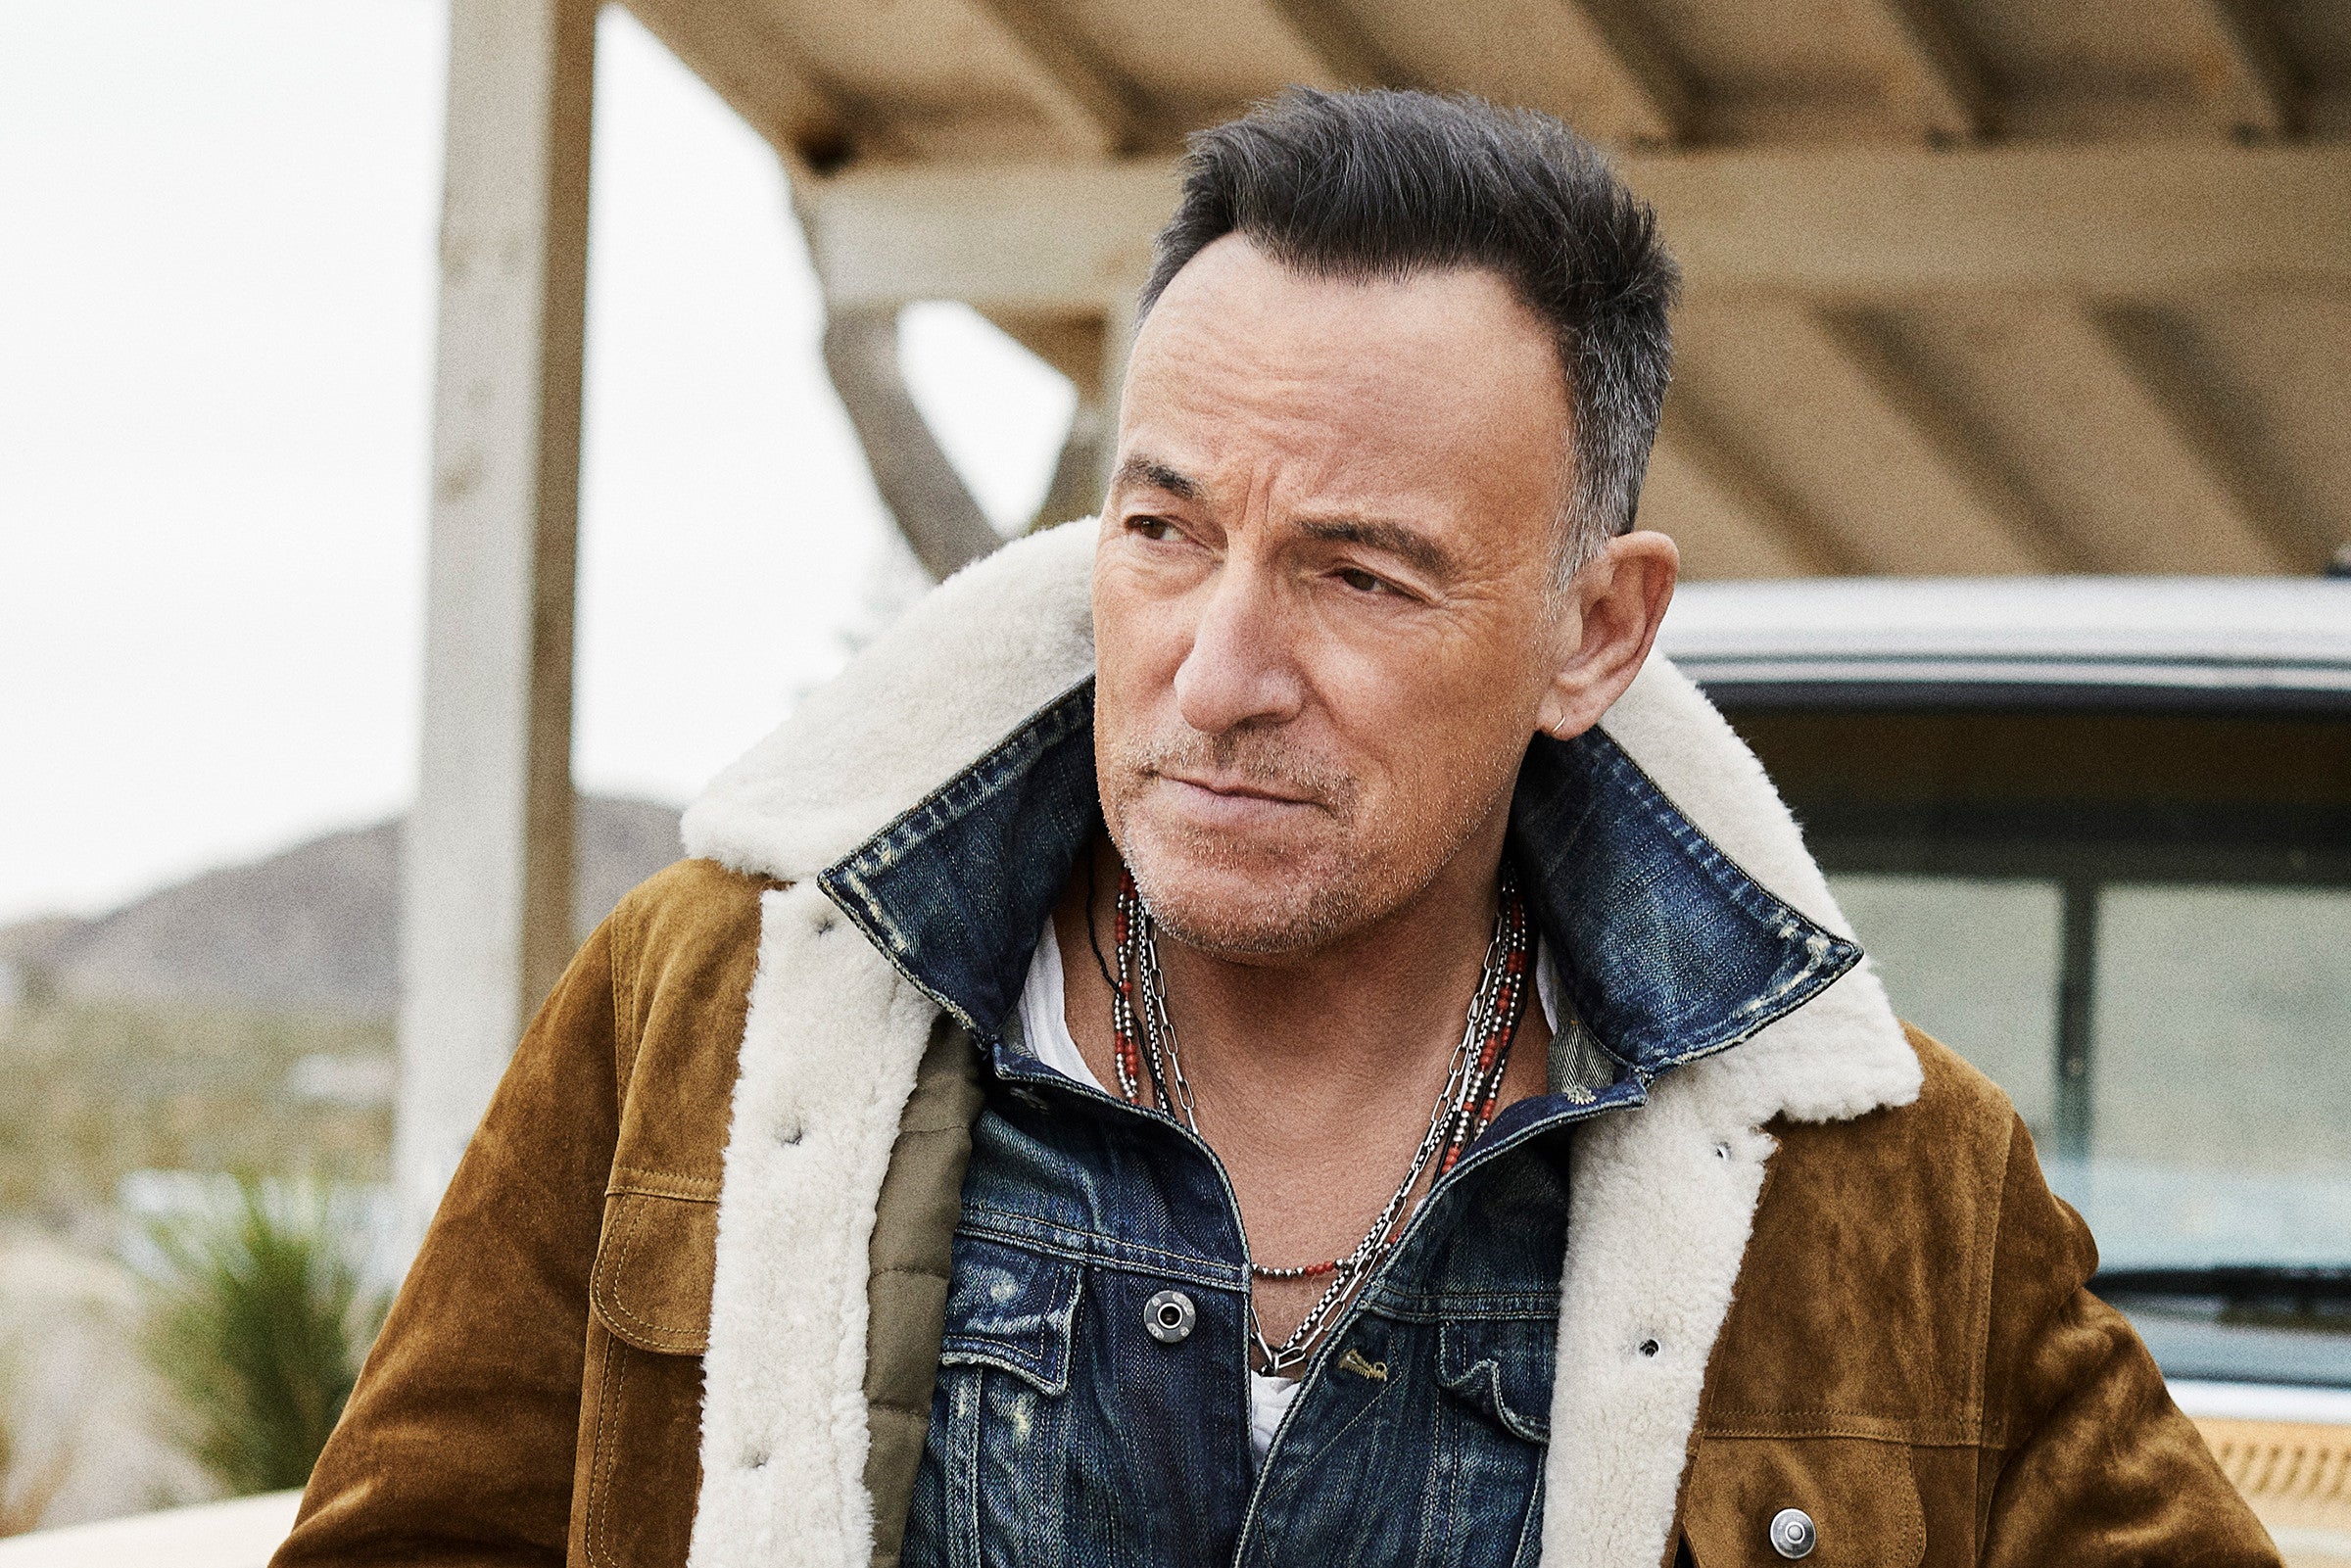 Bruce springsteen age